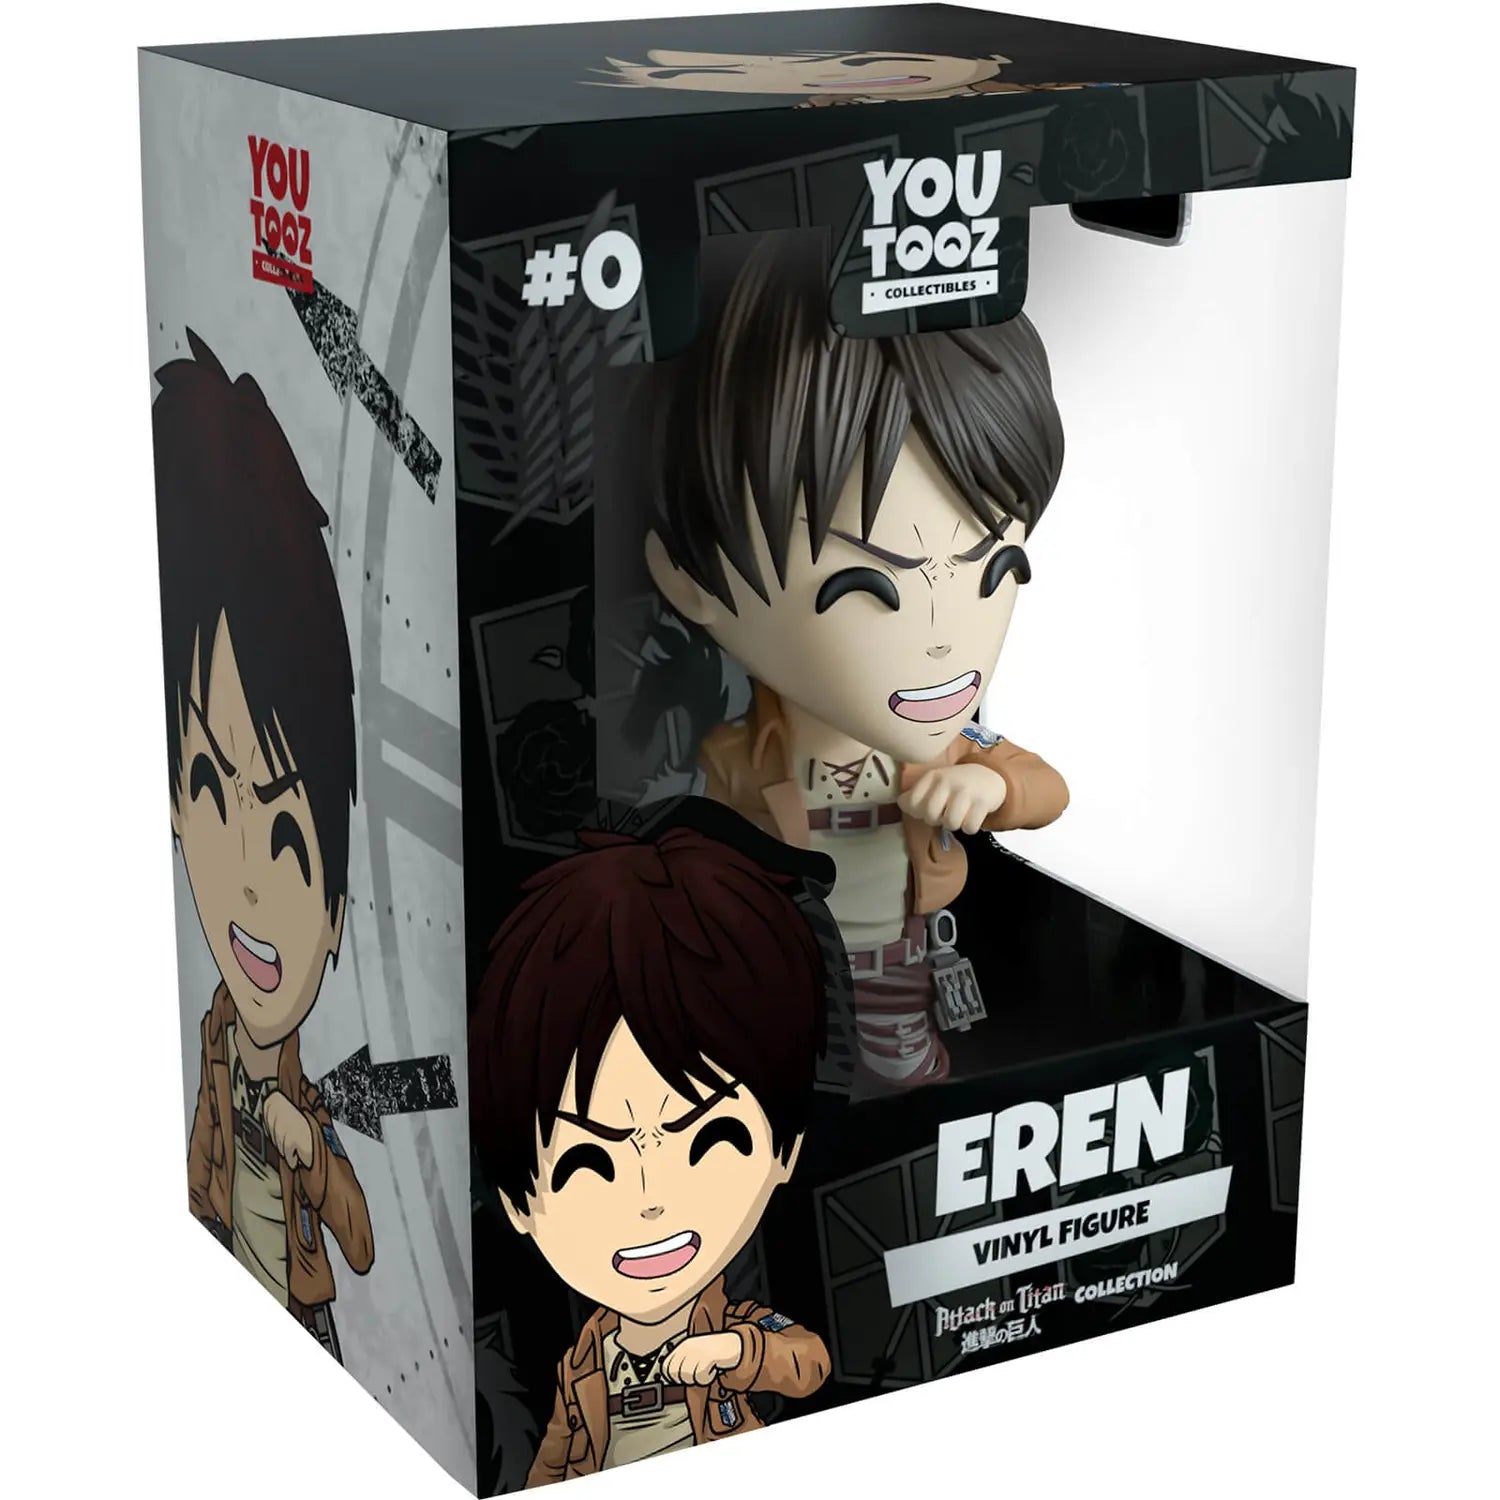 Youtooz Vinyl Figures Attack on Titan- Eren - BumbleToys - 18+, 4+ Years, 5-7 Years, Action Figures, Boys, collectible, collectors, Pre-Order, Youtooz